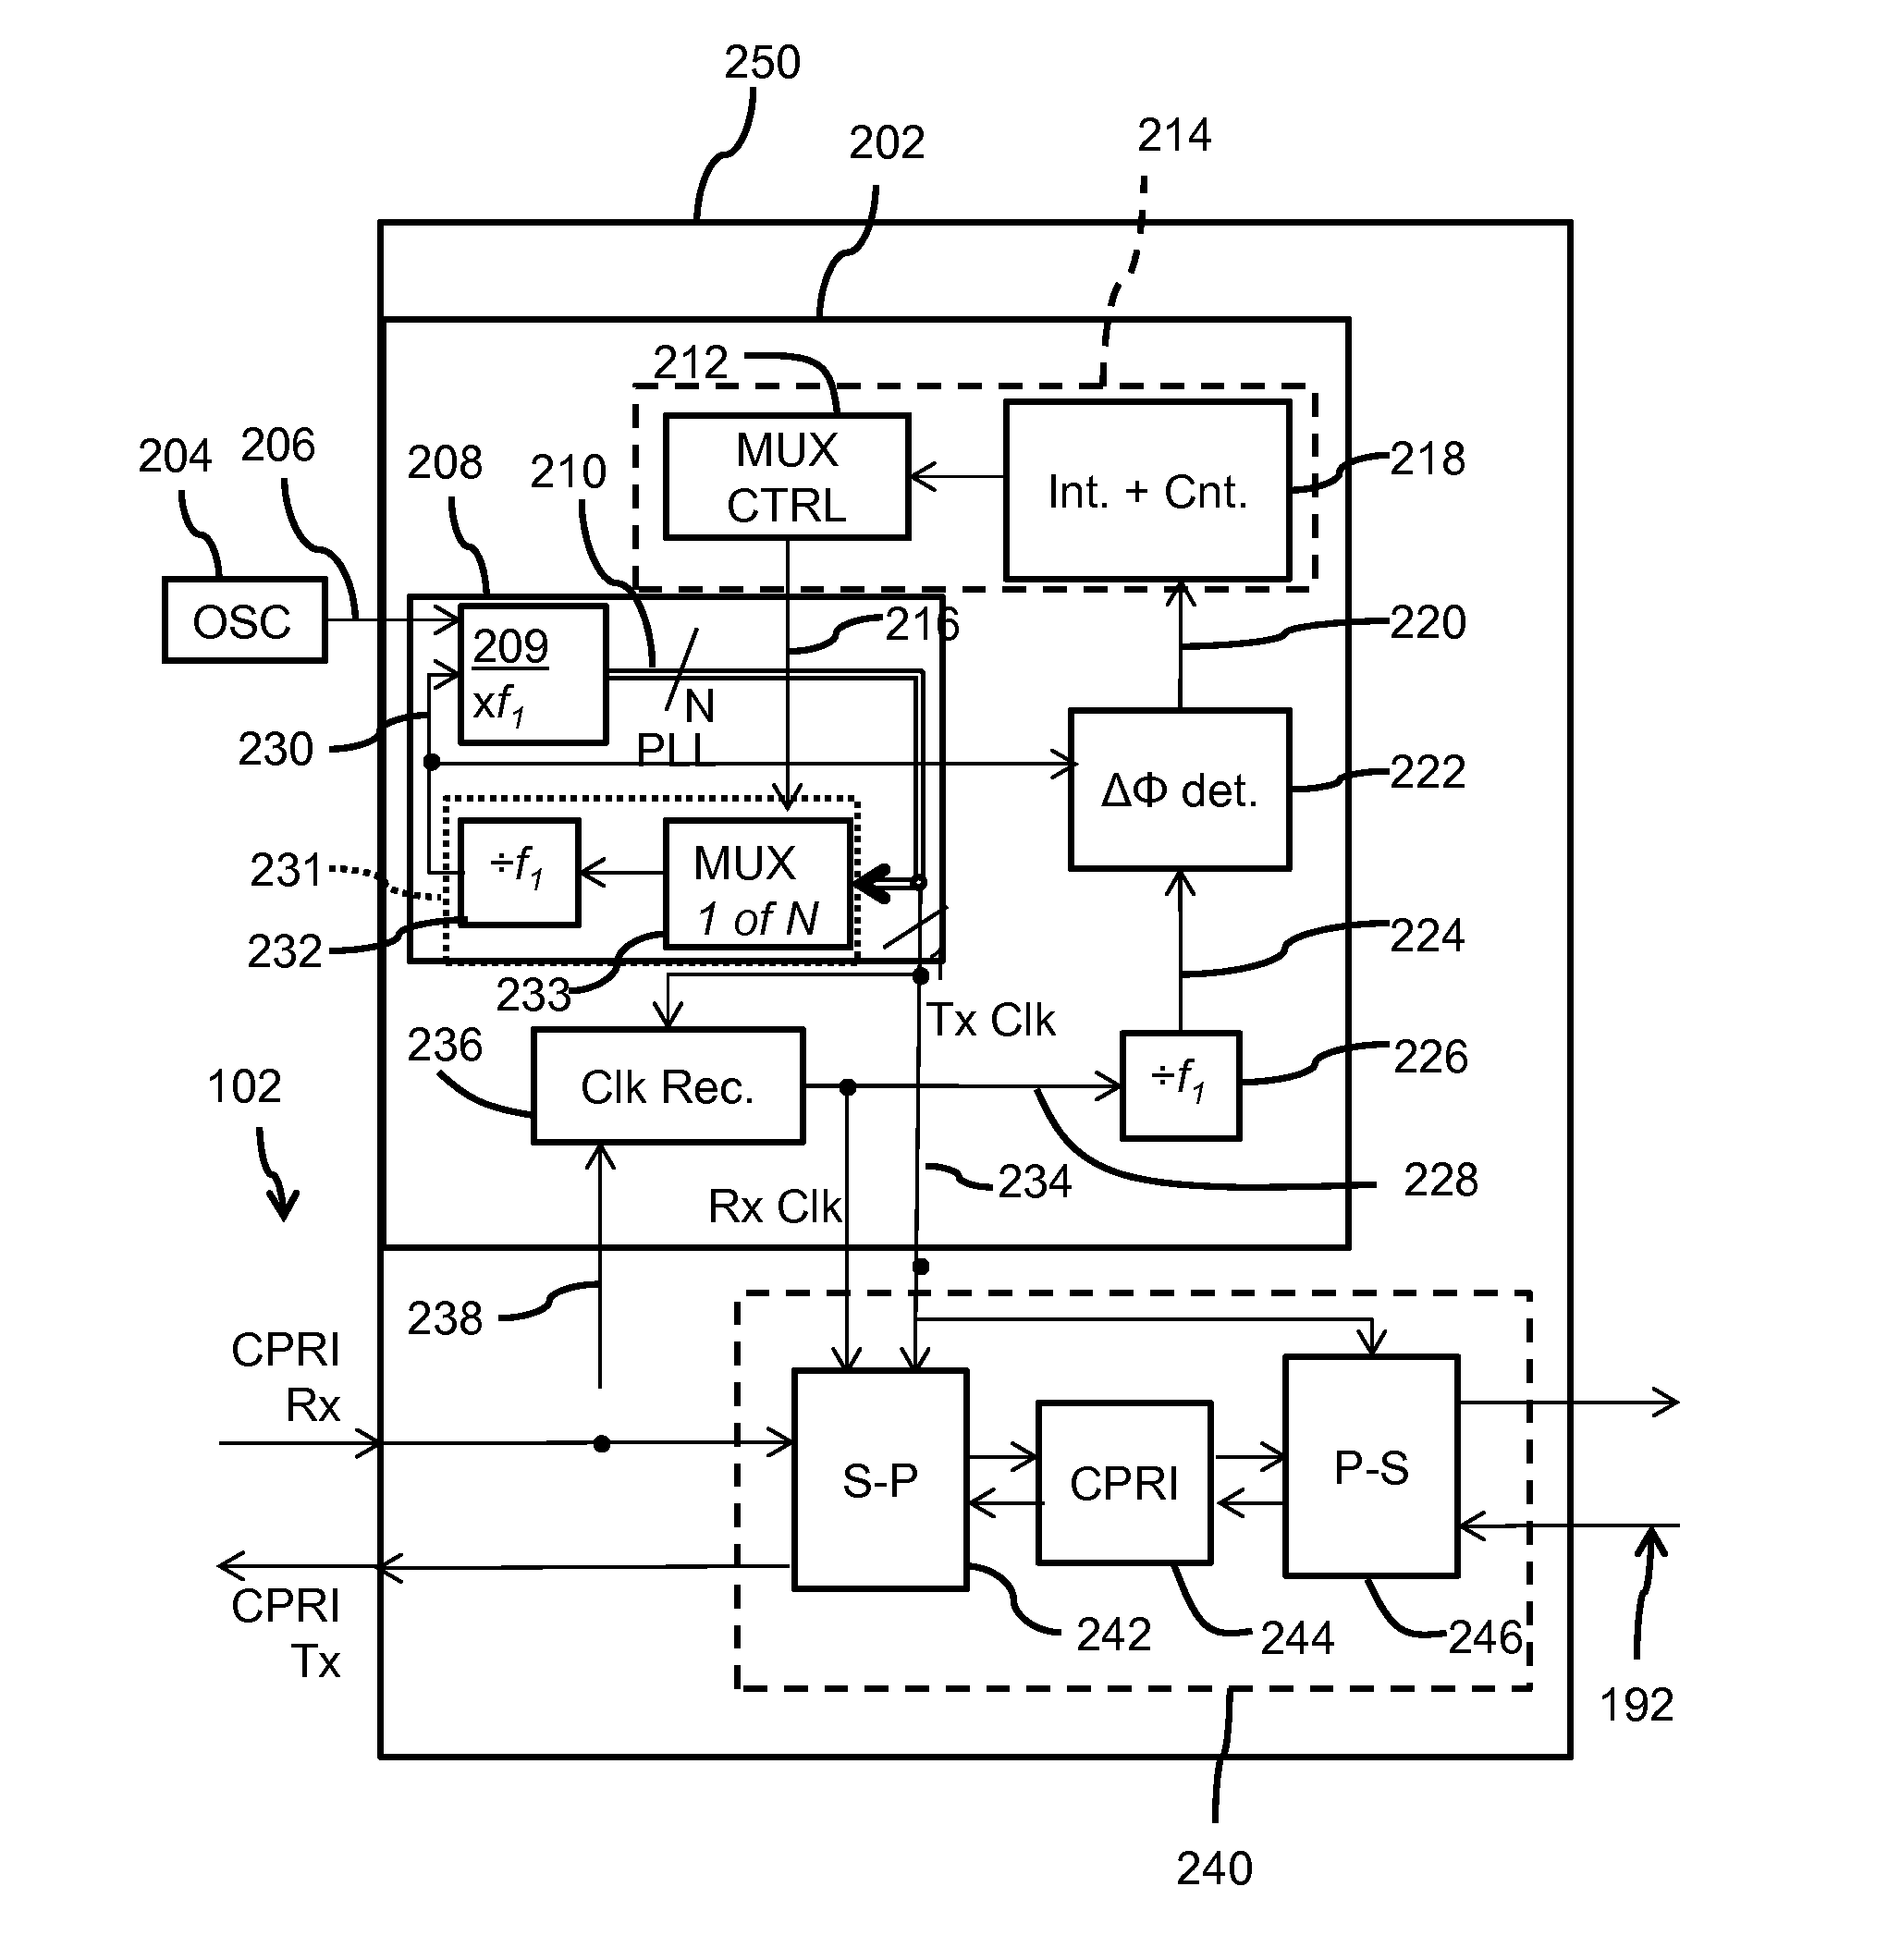 Synchronization circuitry, common public radio interface enable device, and a method of synchronizing a synchronized clock signal of a second transceiver to a clock of a first transceiver